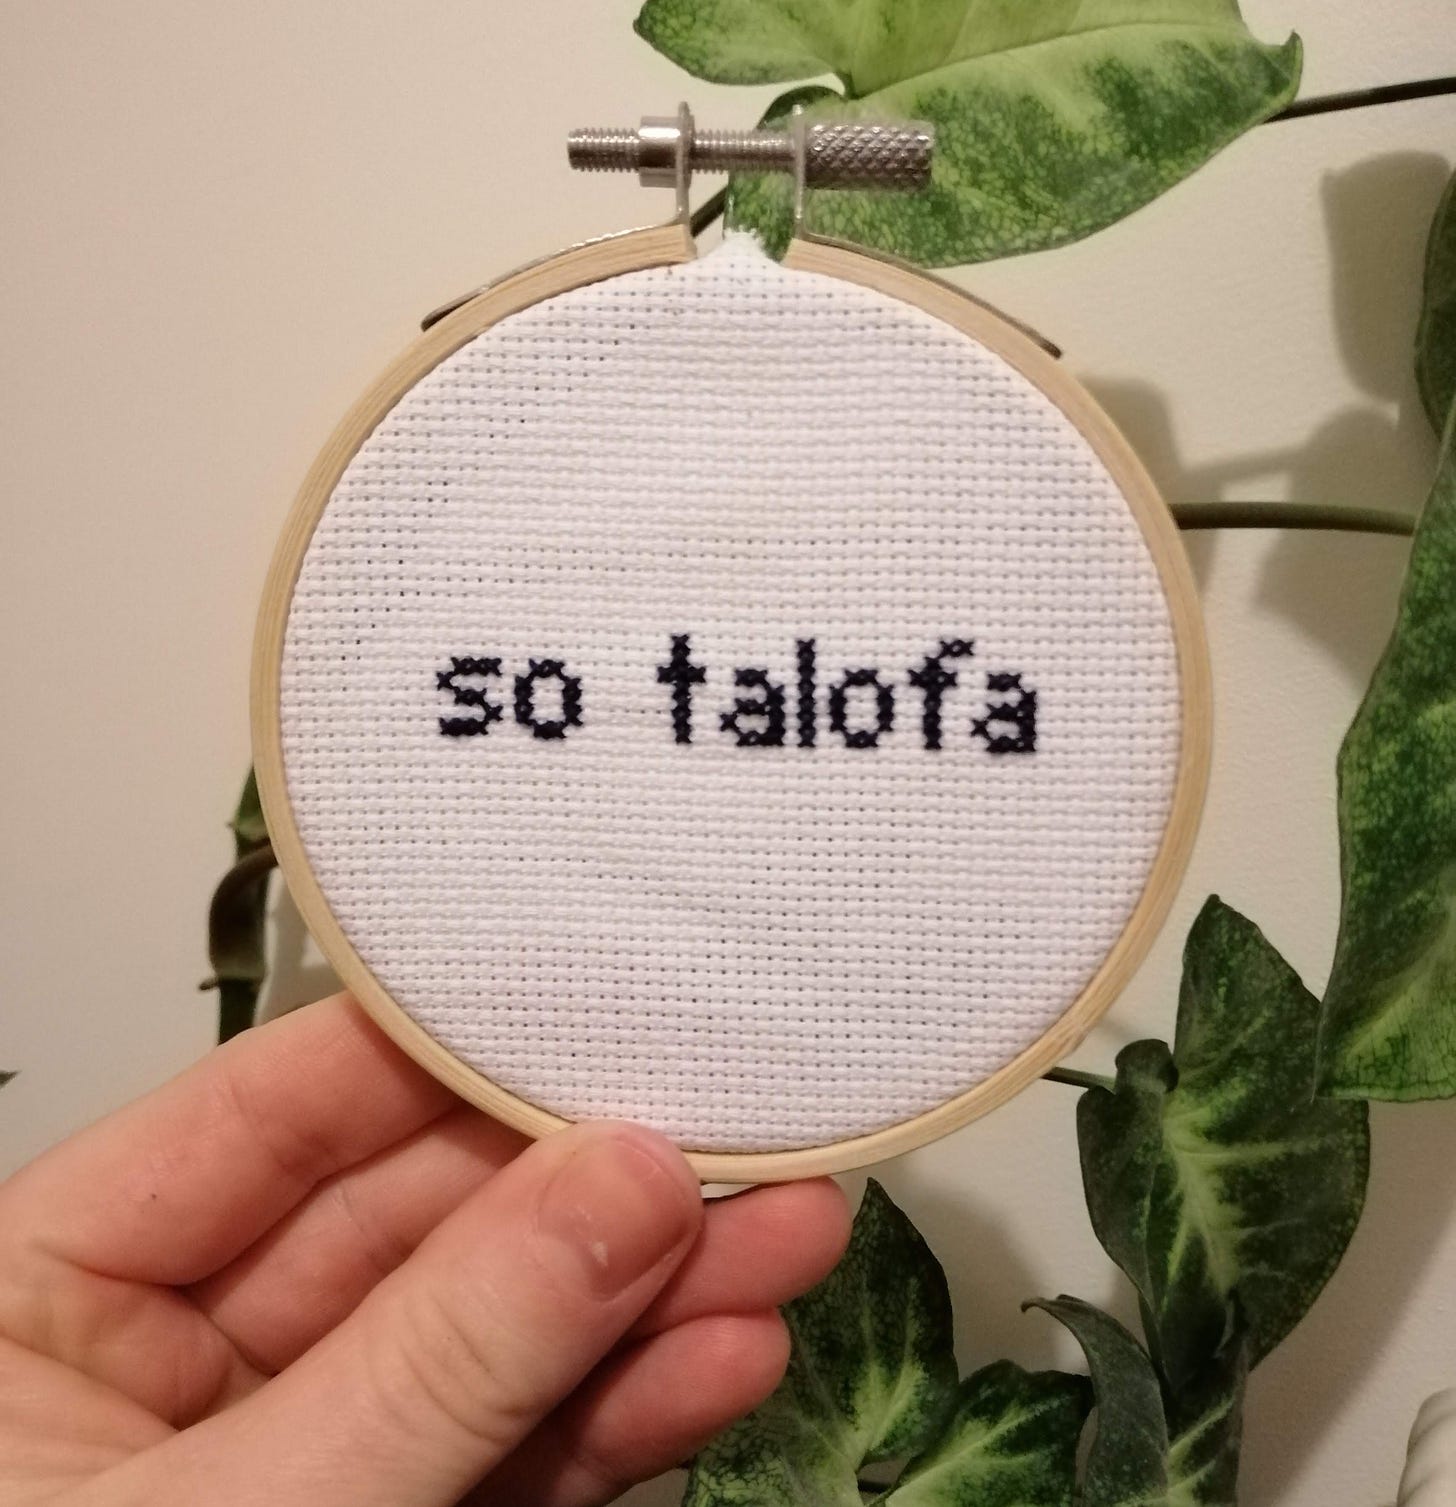 Cross stitch in a small frame being held in someone's hand. The text simply says "so talofa"